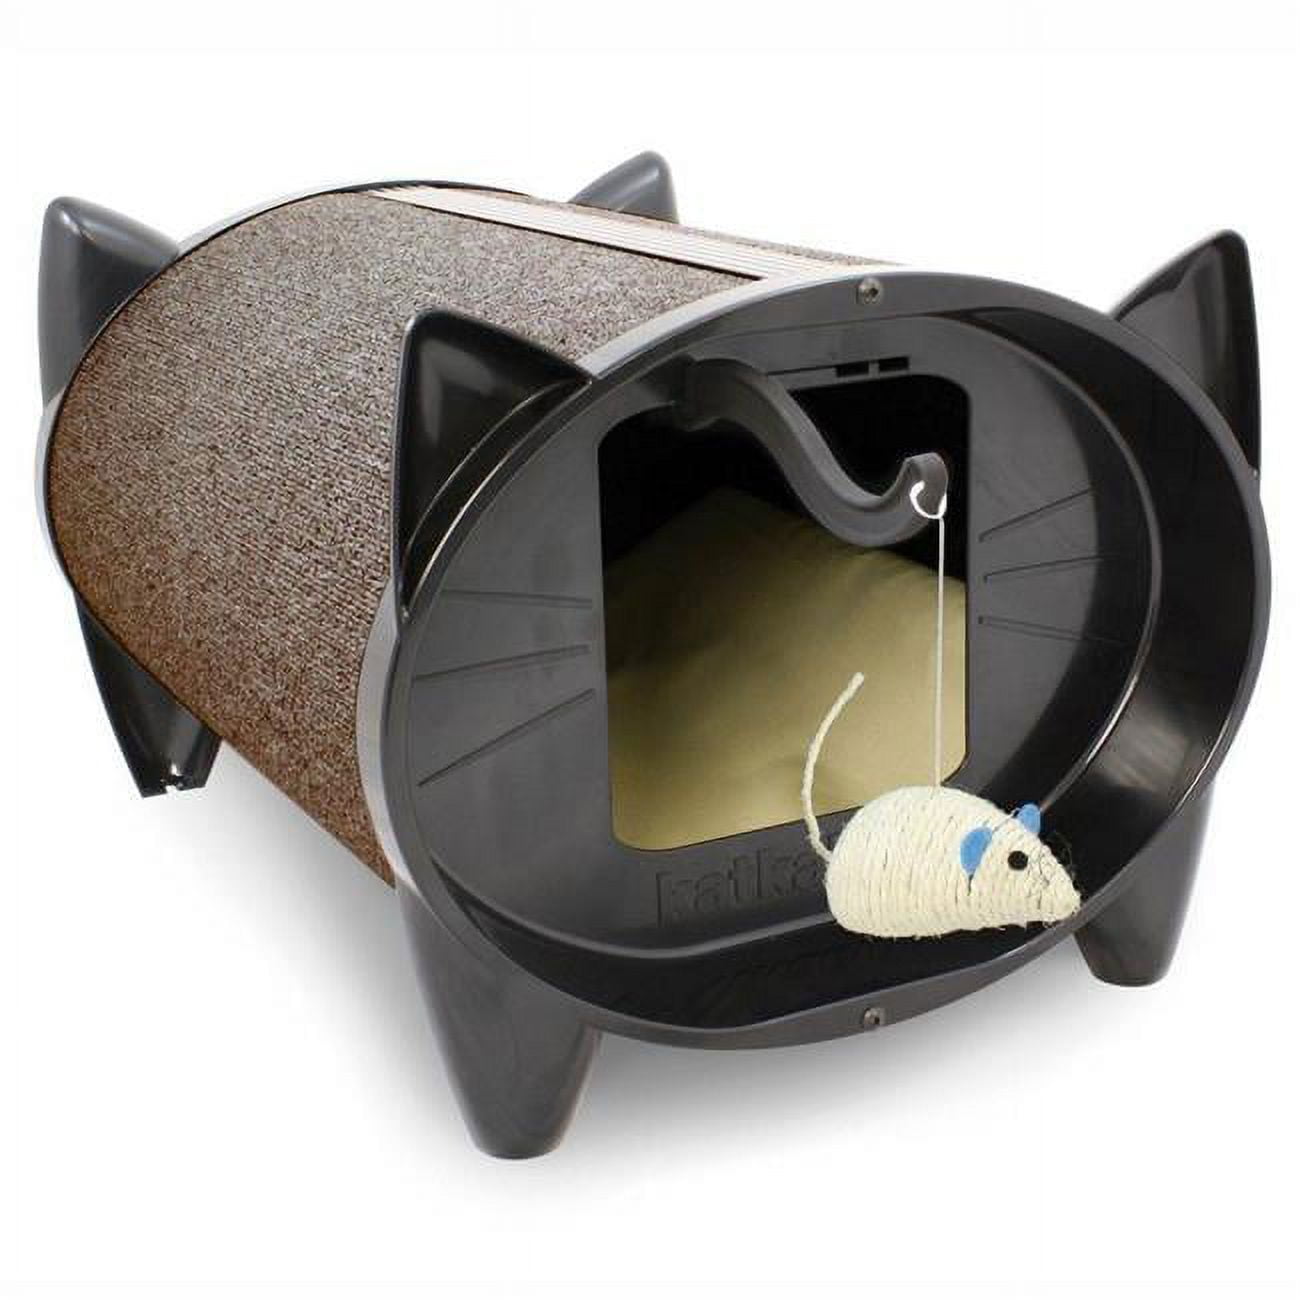 Picture of Brinsea Products SKZB Indoor Cat House Cat Scratcher, Cocoa